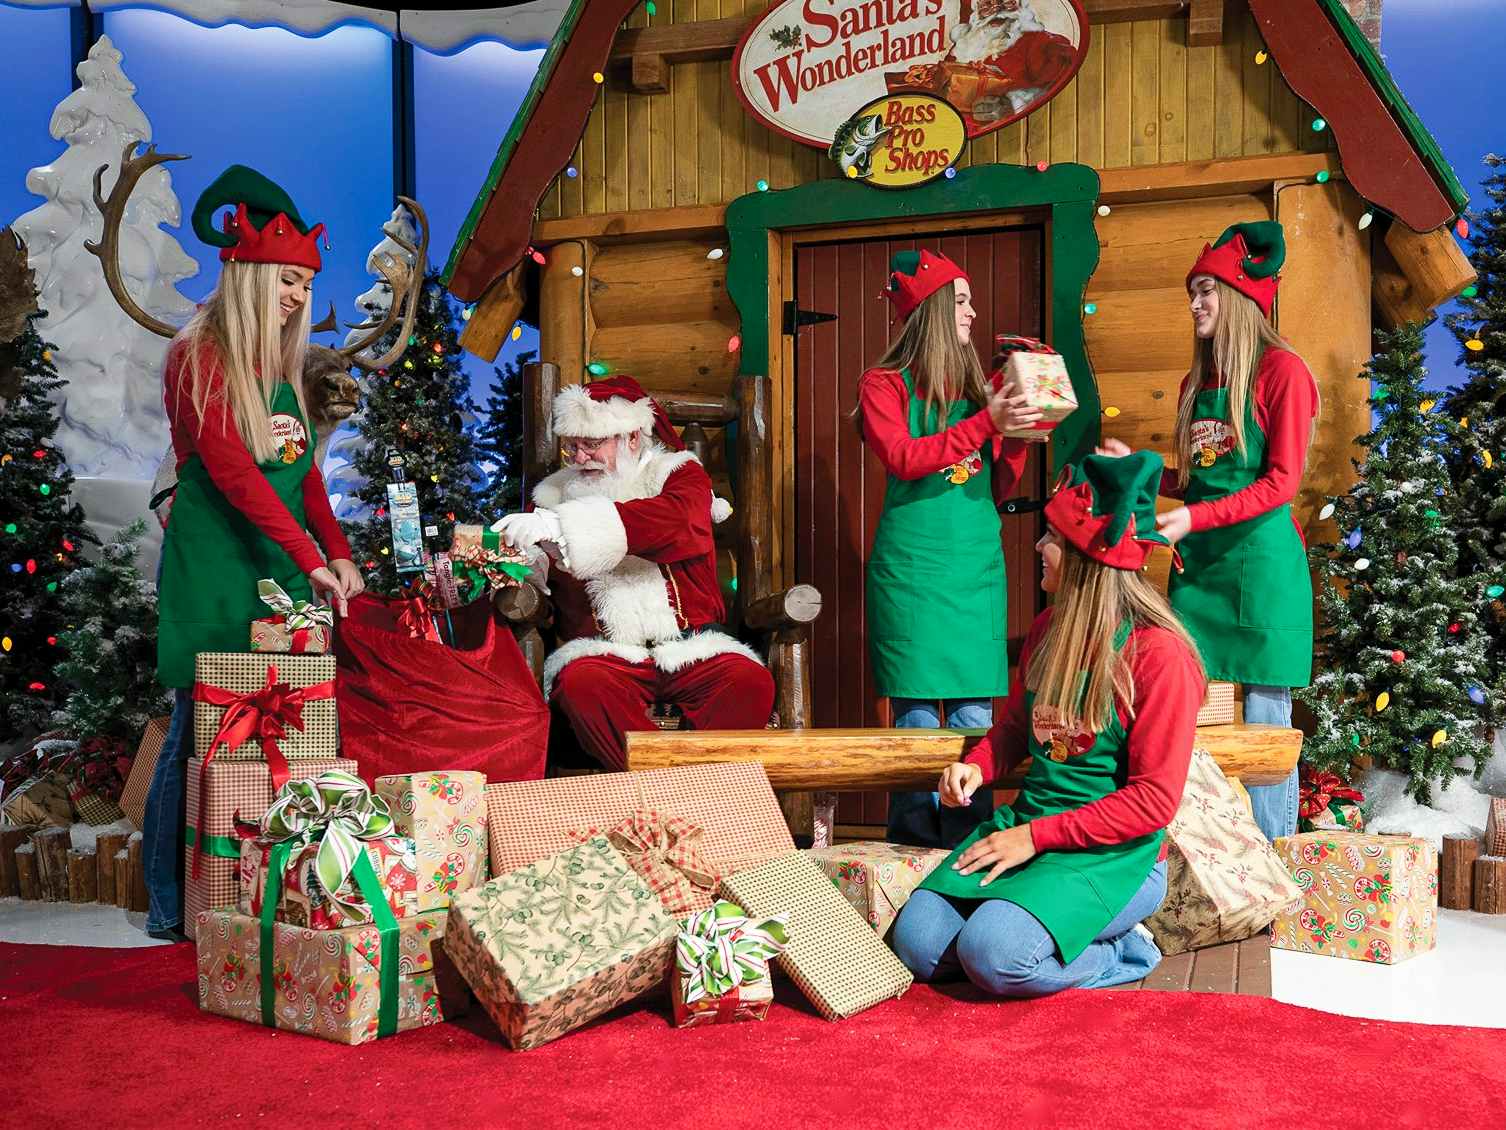 bass-pro-shops-free-pictures-with-santa-holiday-christmas-santas-wonderland-official-media-facebook-2